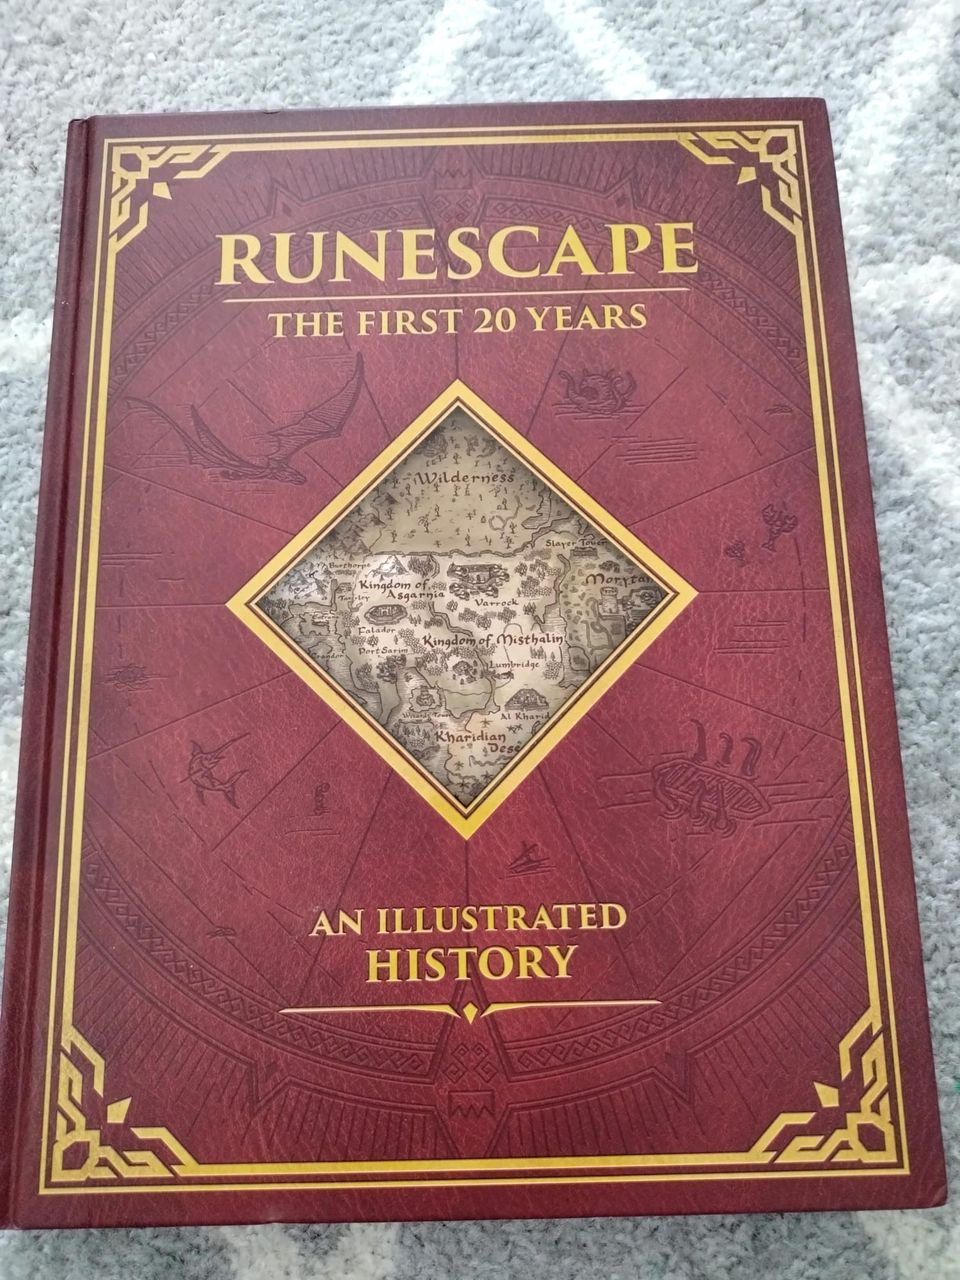 Runescape First 20 years Illustrated edition